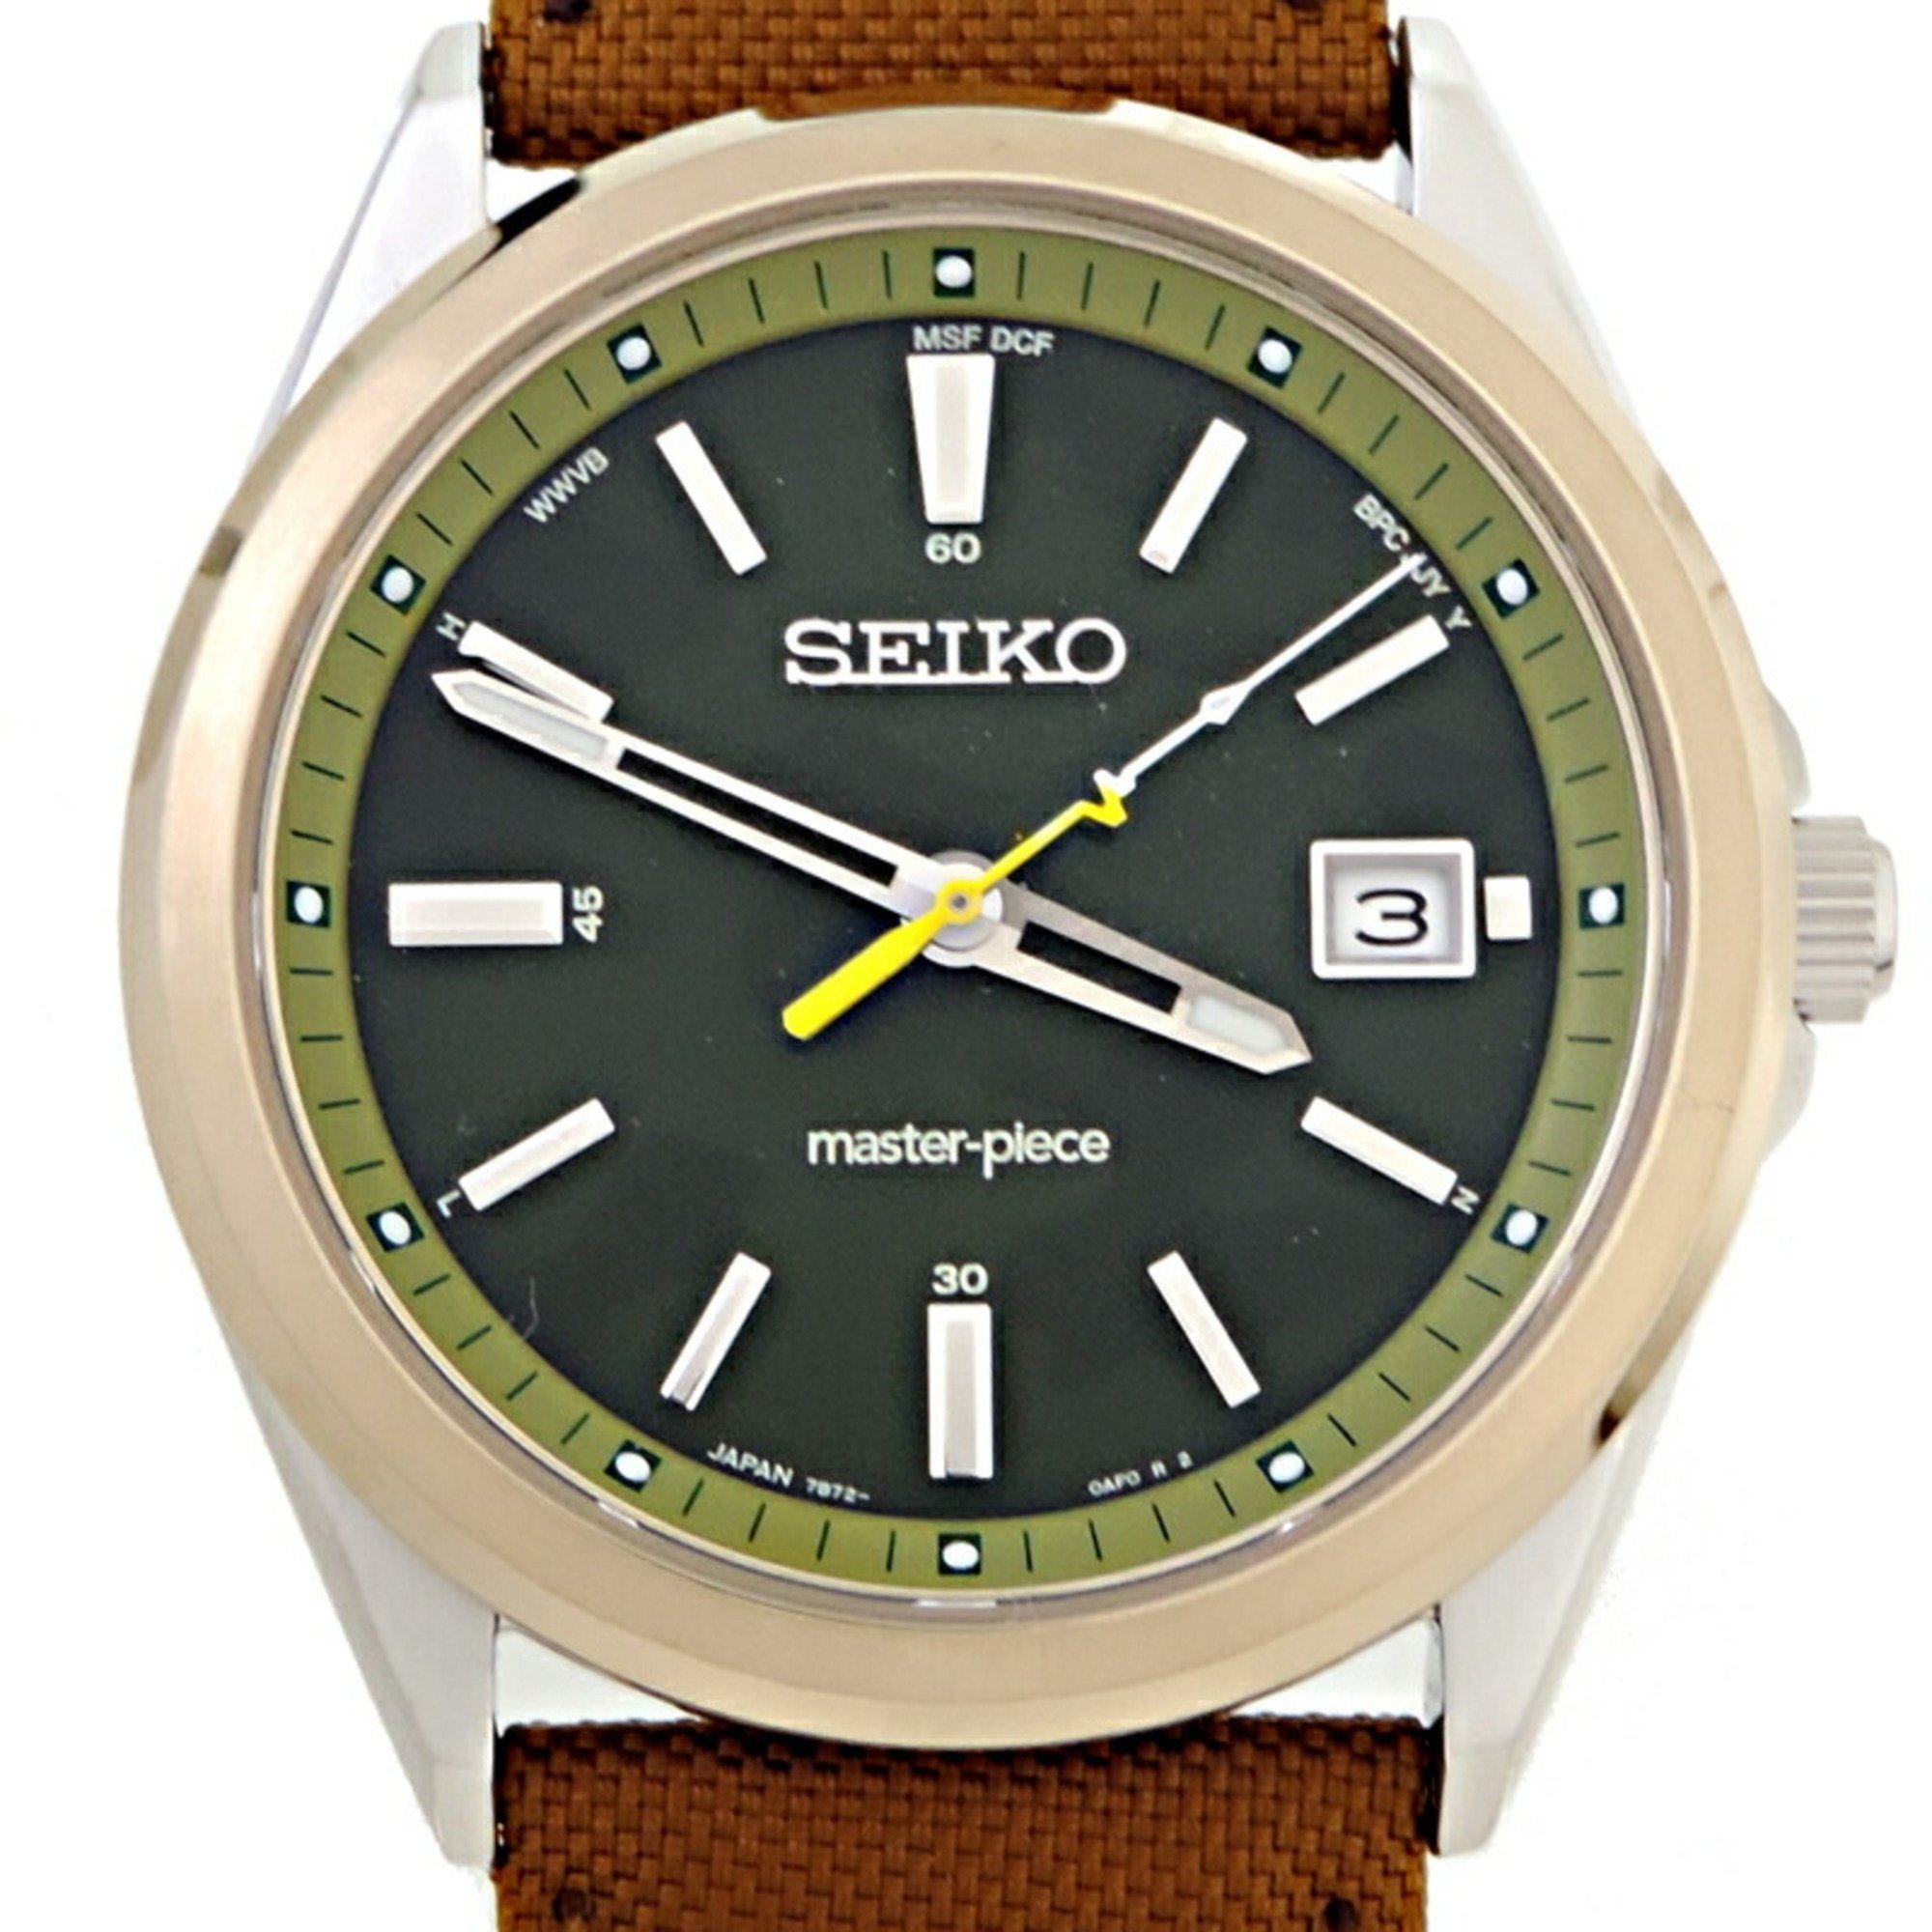 Seiko Selection Masterpiece Limited Edition to 700 Men's Watch SBTM314 (7B72-0AA0)